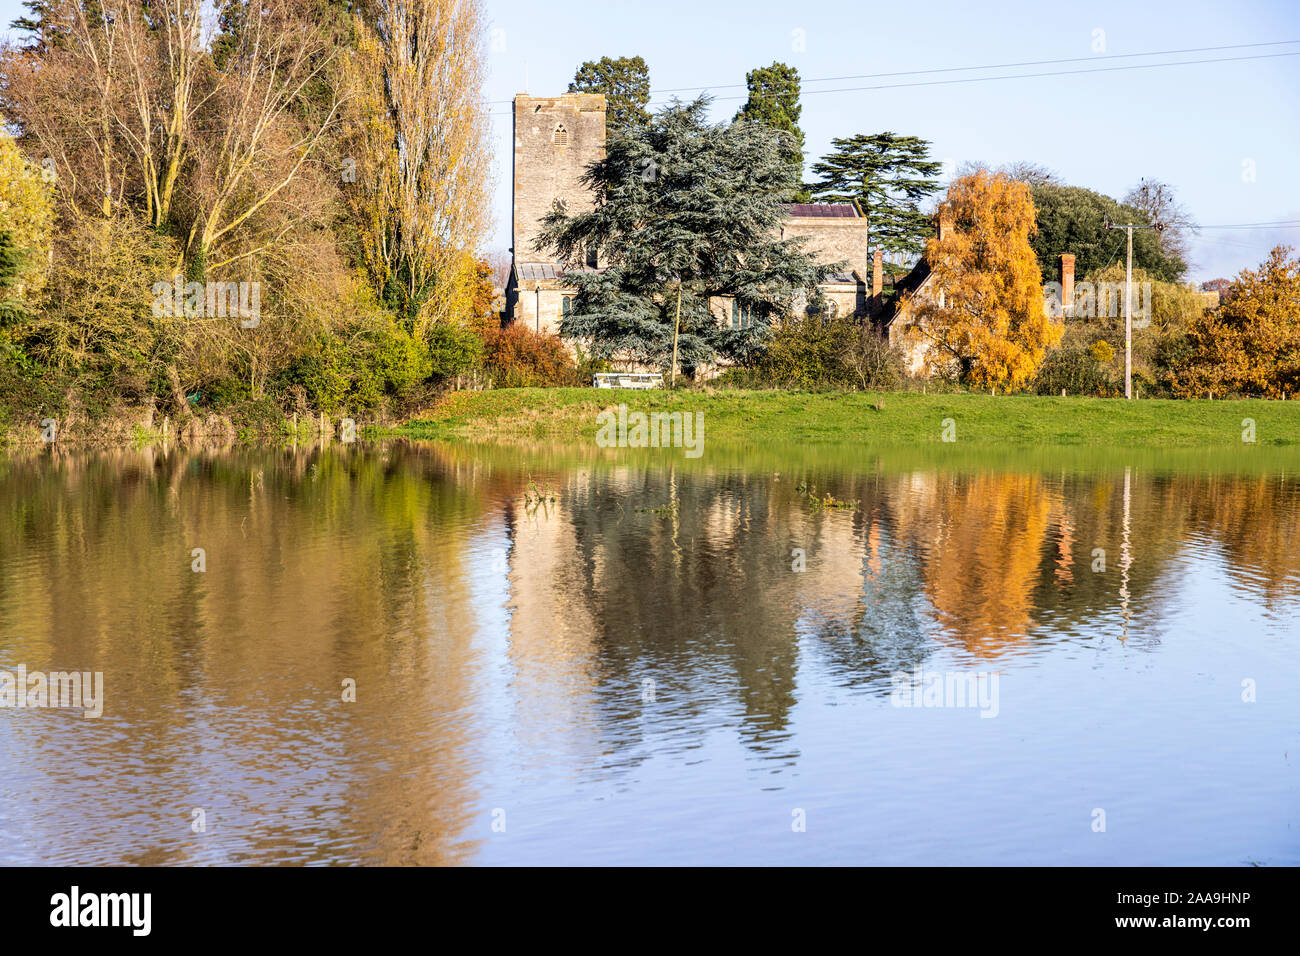 St Marys church seen across floodwater from the River Severn filling fields in the Severn Vale village of Deerhurst, Gloucestershire UK on 18/11/2019 Stock Photo